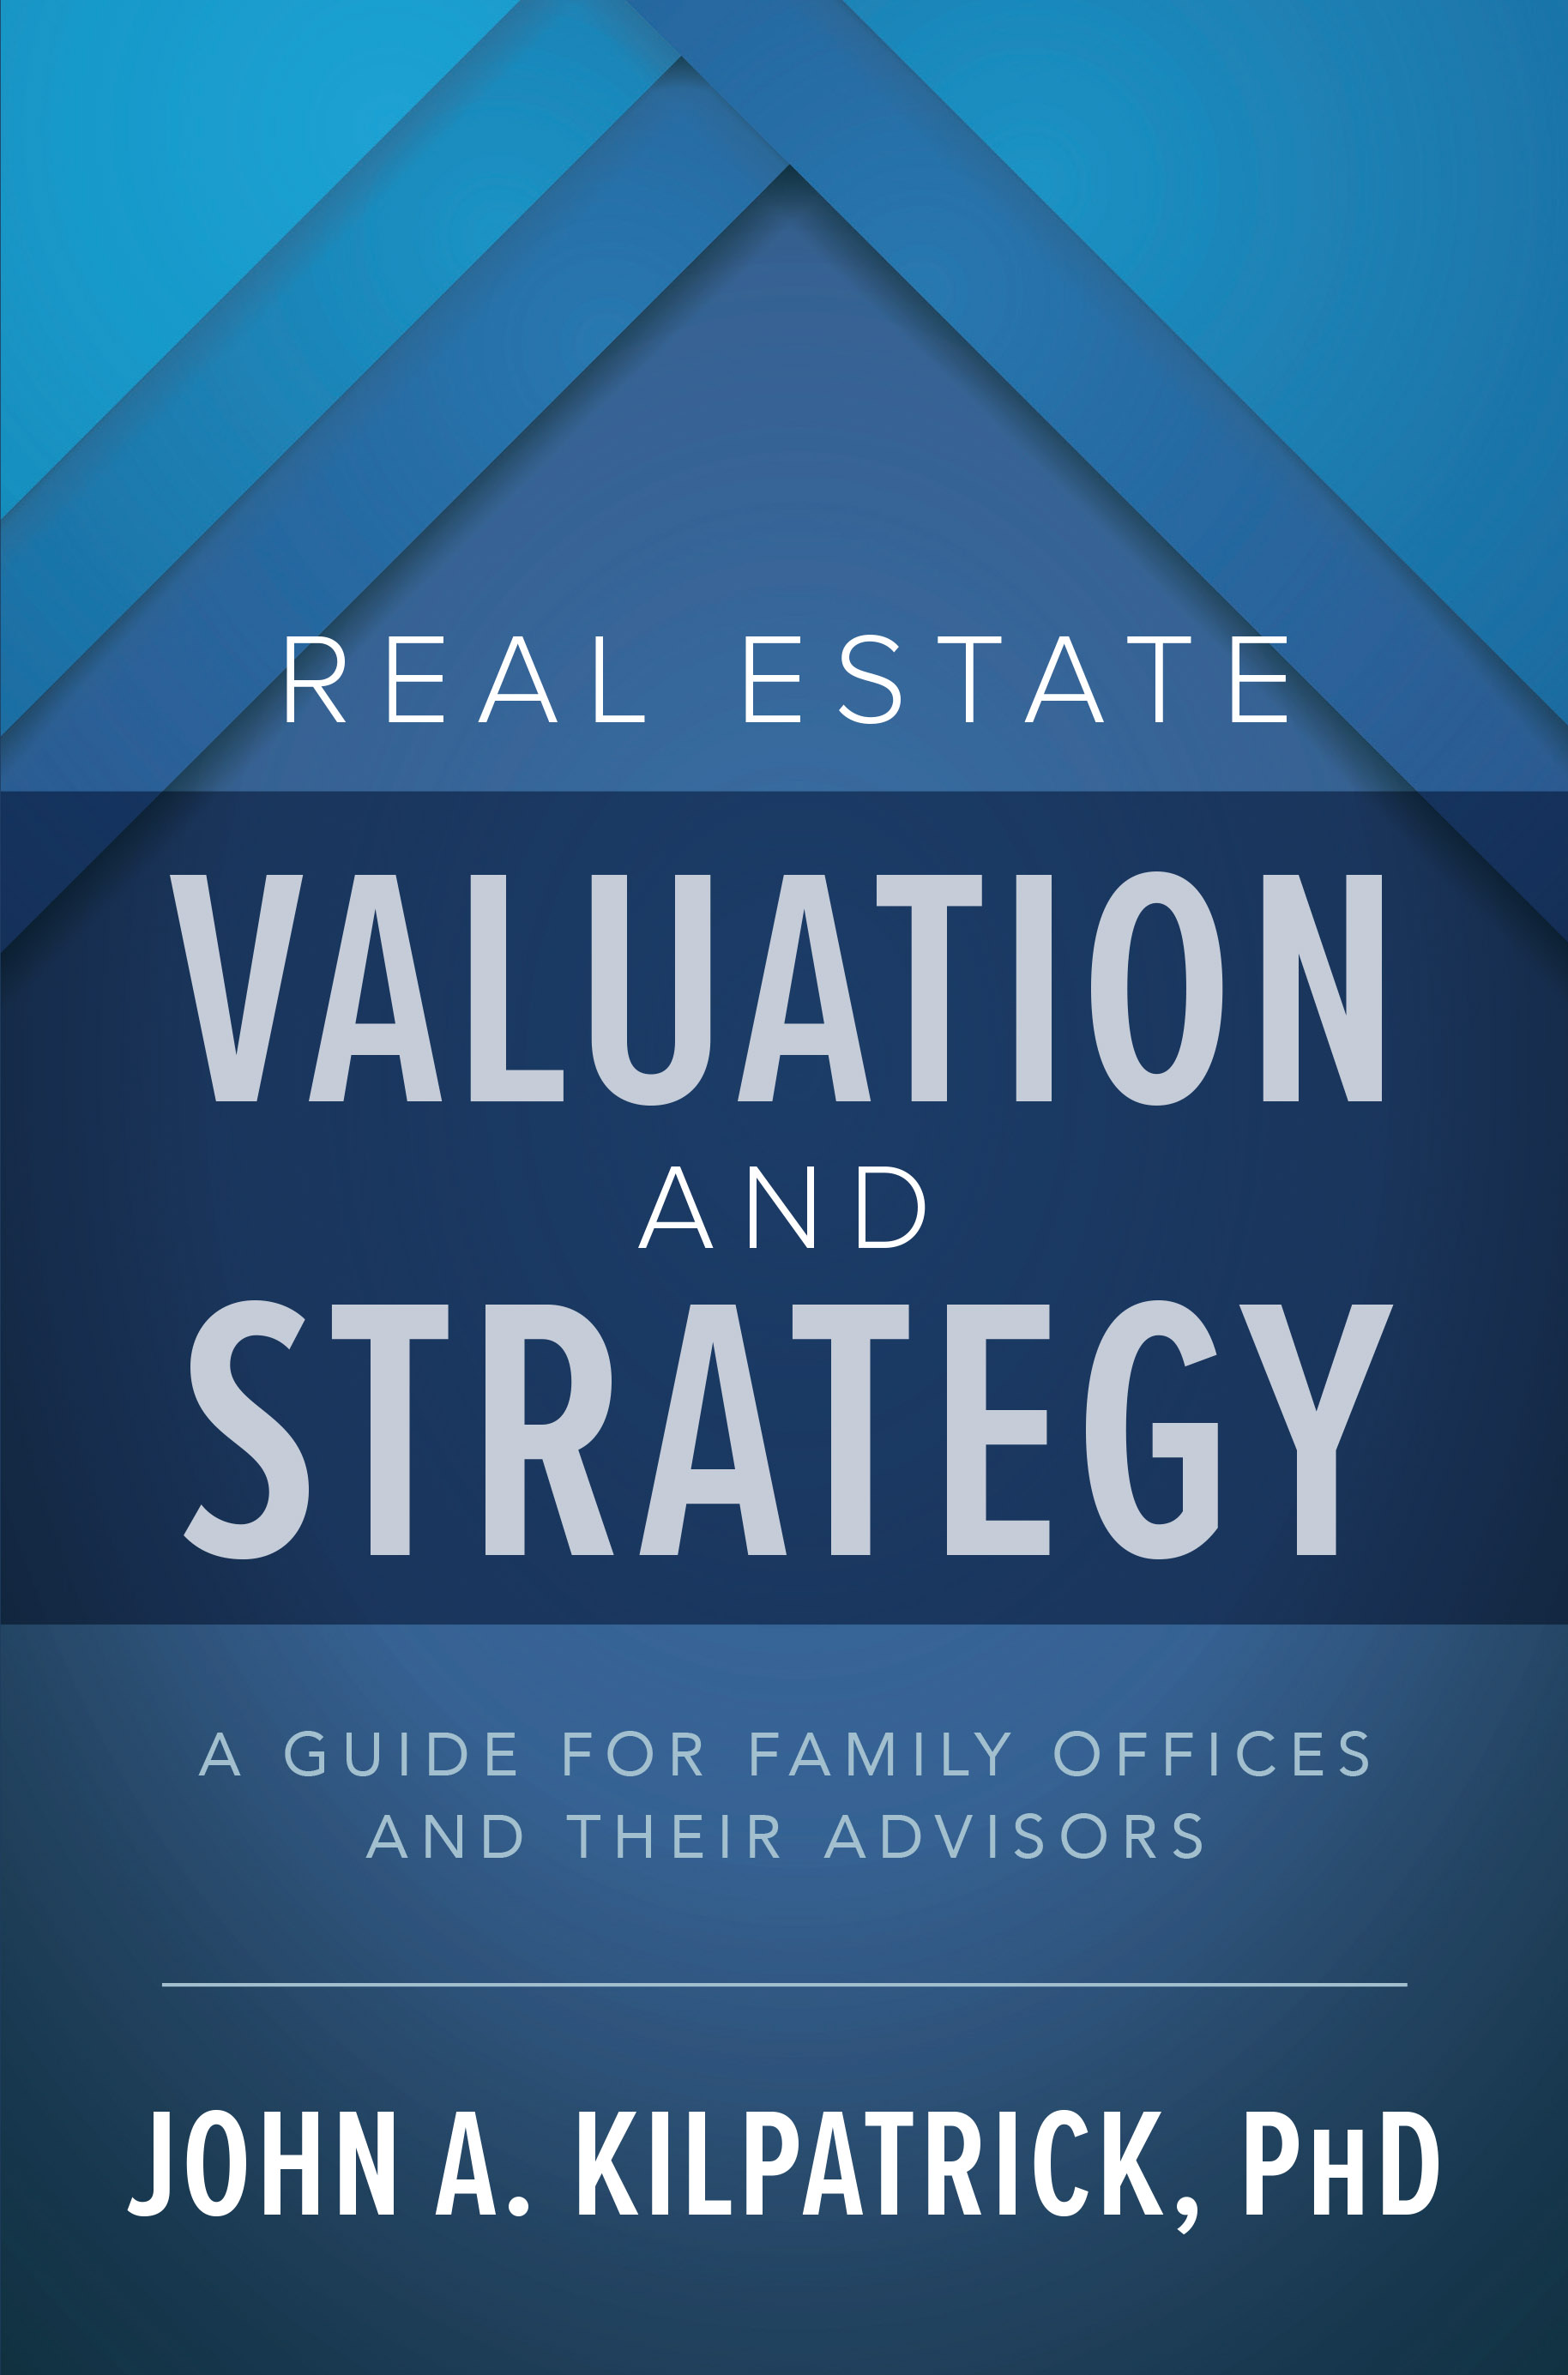 Real Estate Valuation and Strategy